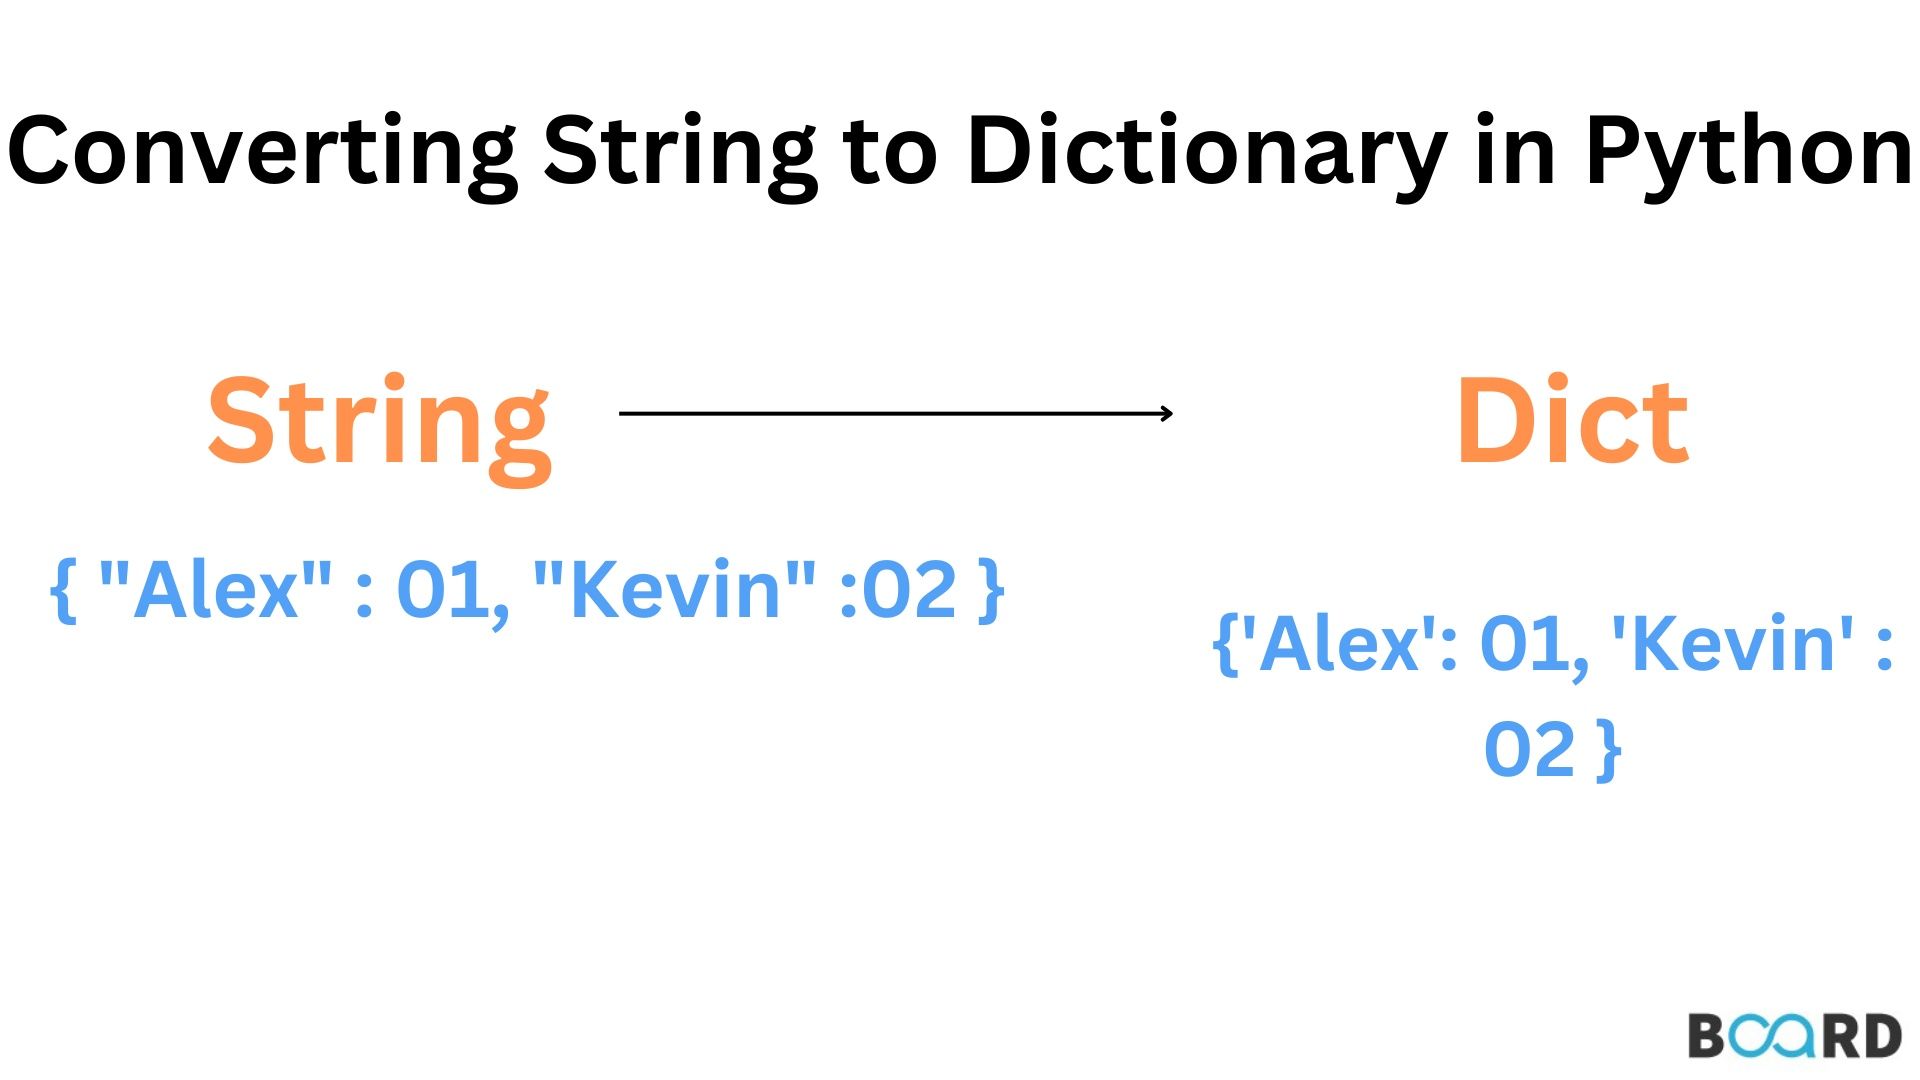 Converting String to Dictionary in Python